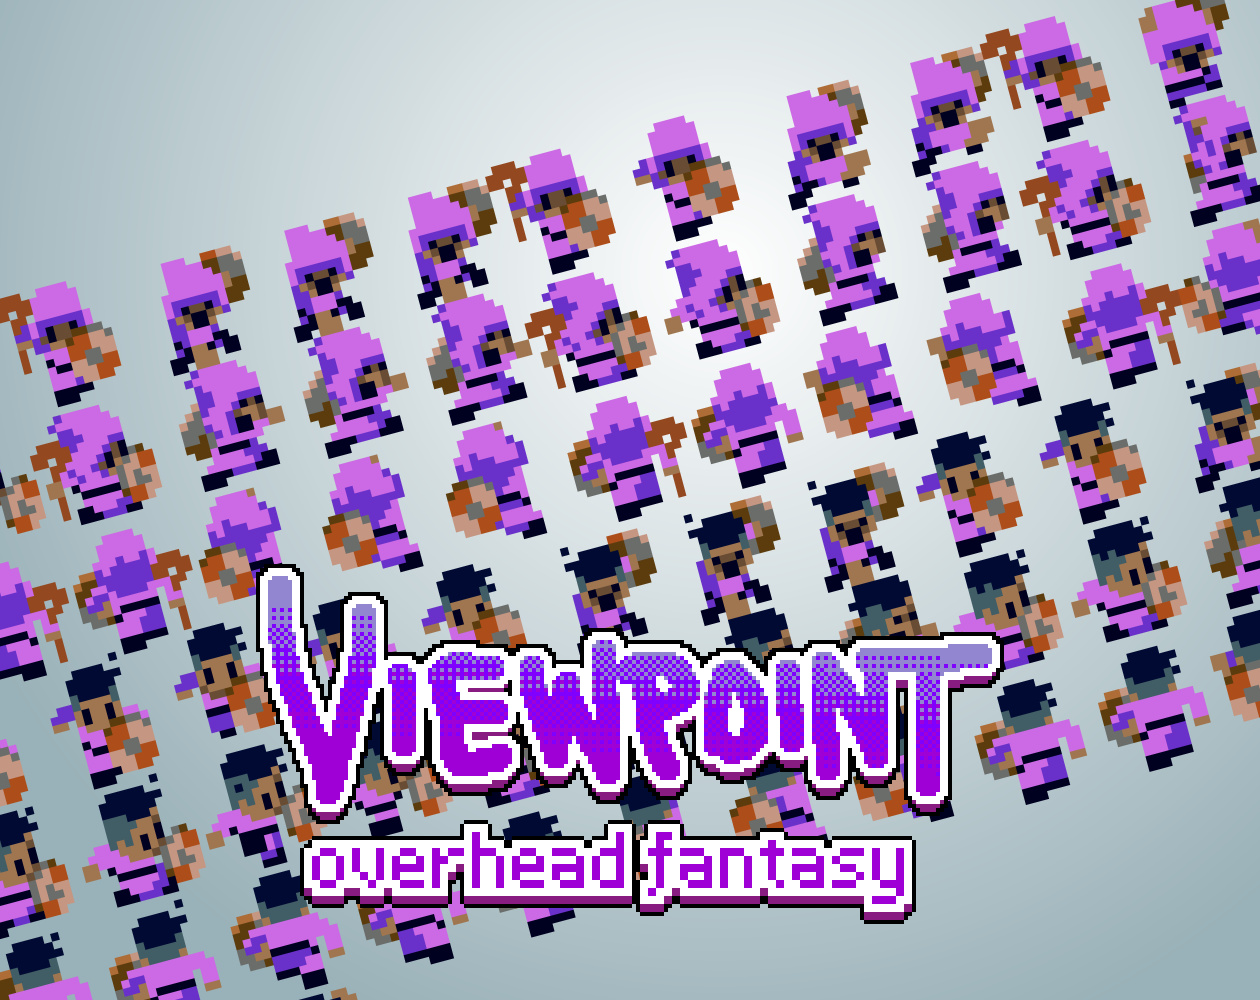 VIEWPOINT Overhead Fantasy Violet Wizard